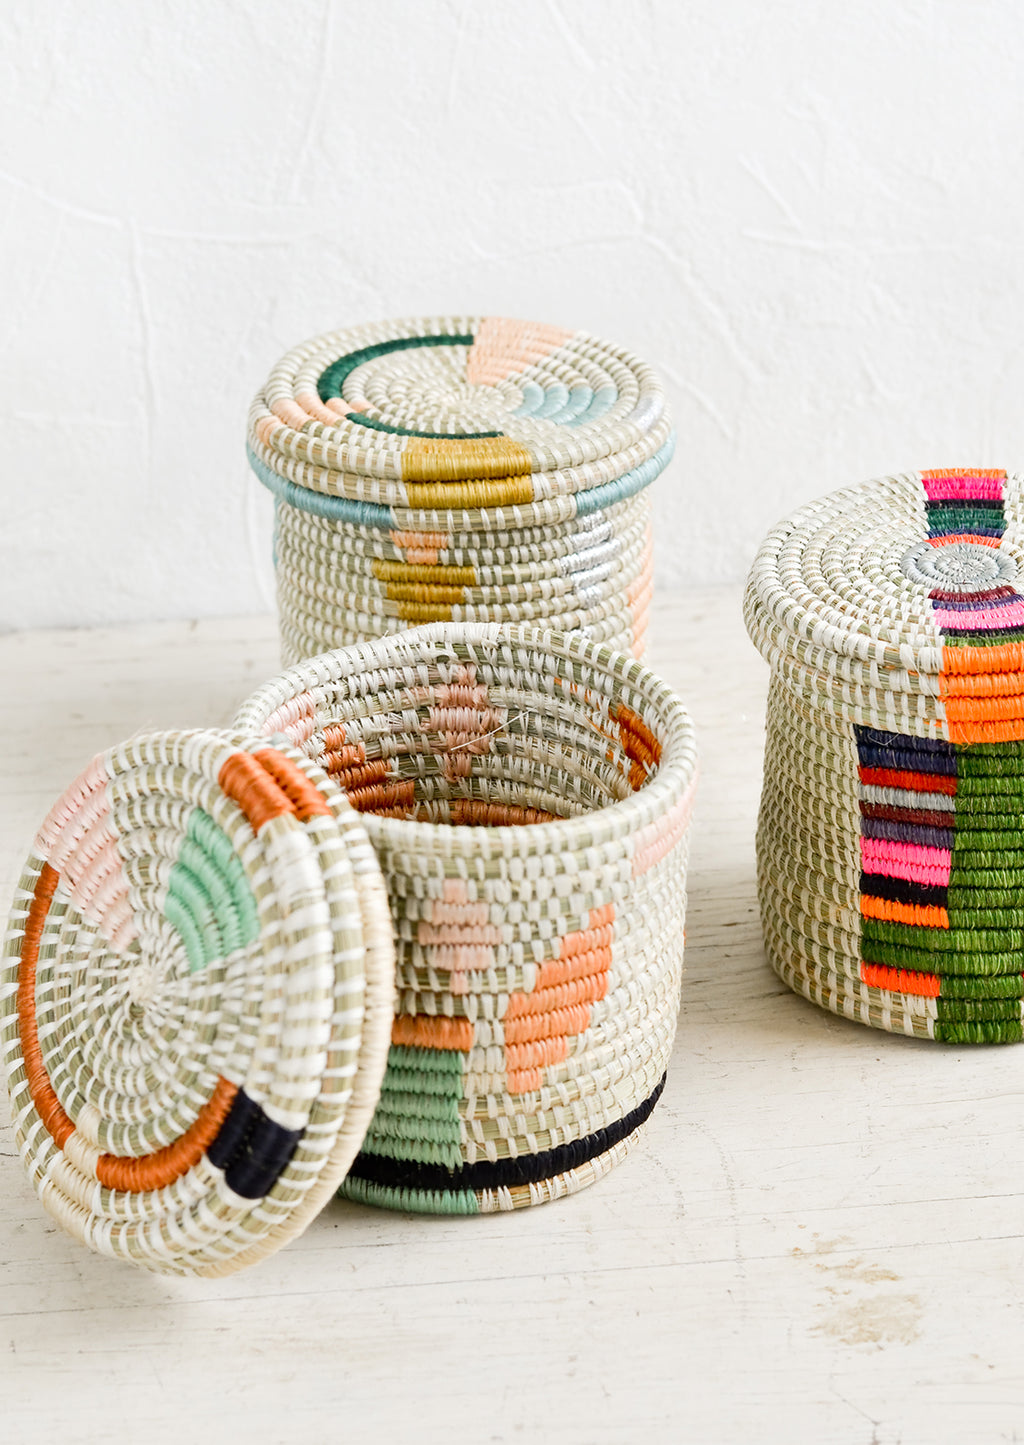 2: Assorted lidded woven baskets in a mix of colors and patterns.